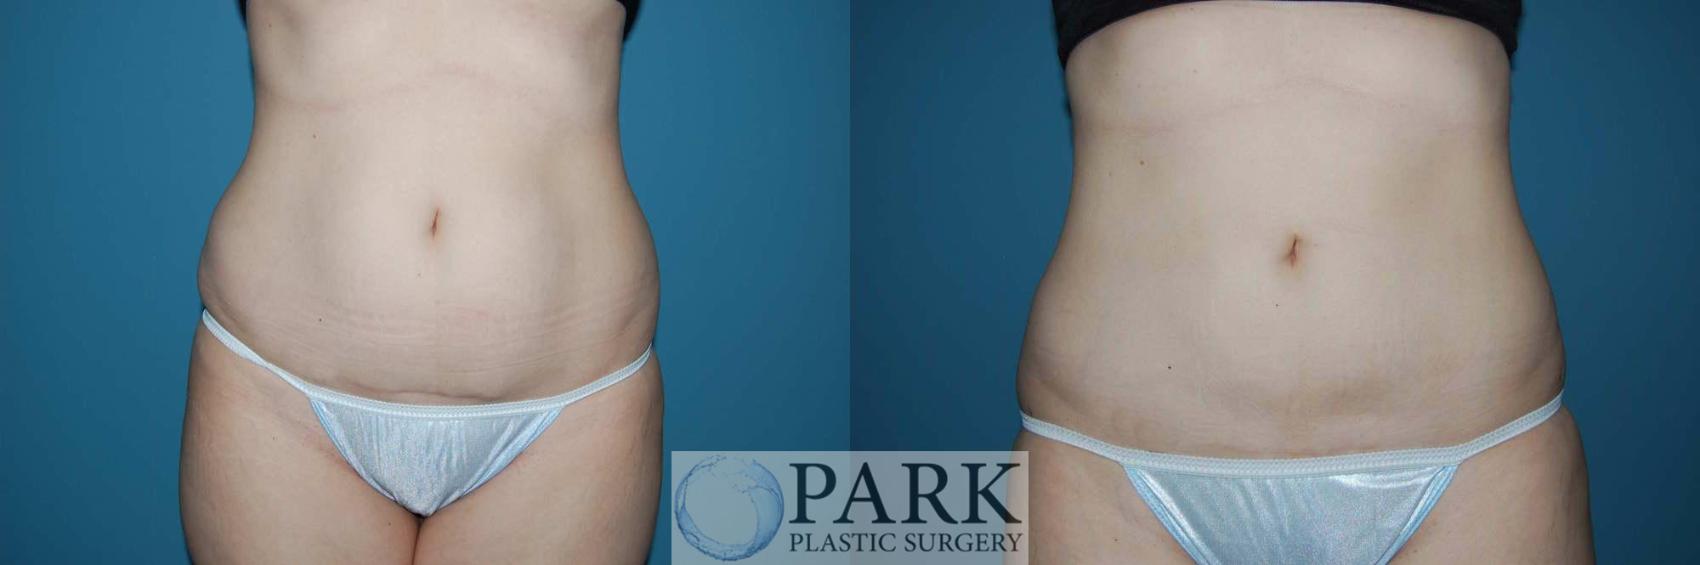 Before & After Liposuction Case 4 Front View in Rocky Mount & Greenville, NC